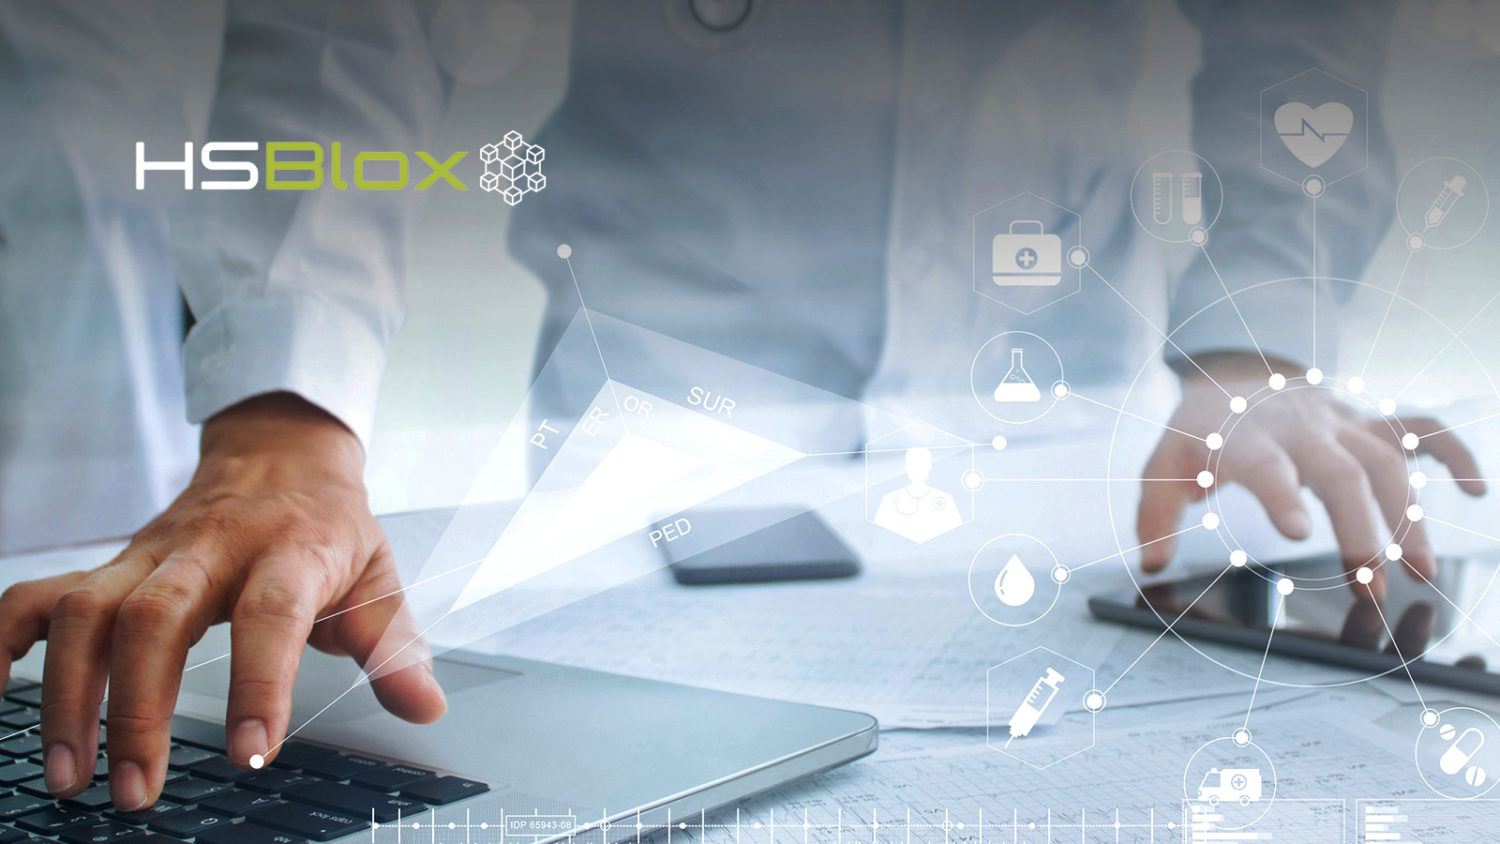 HSBlox’s Blockchain Advances Clinical Trial Sample Management with Increased Visibility,